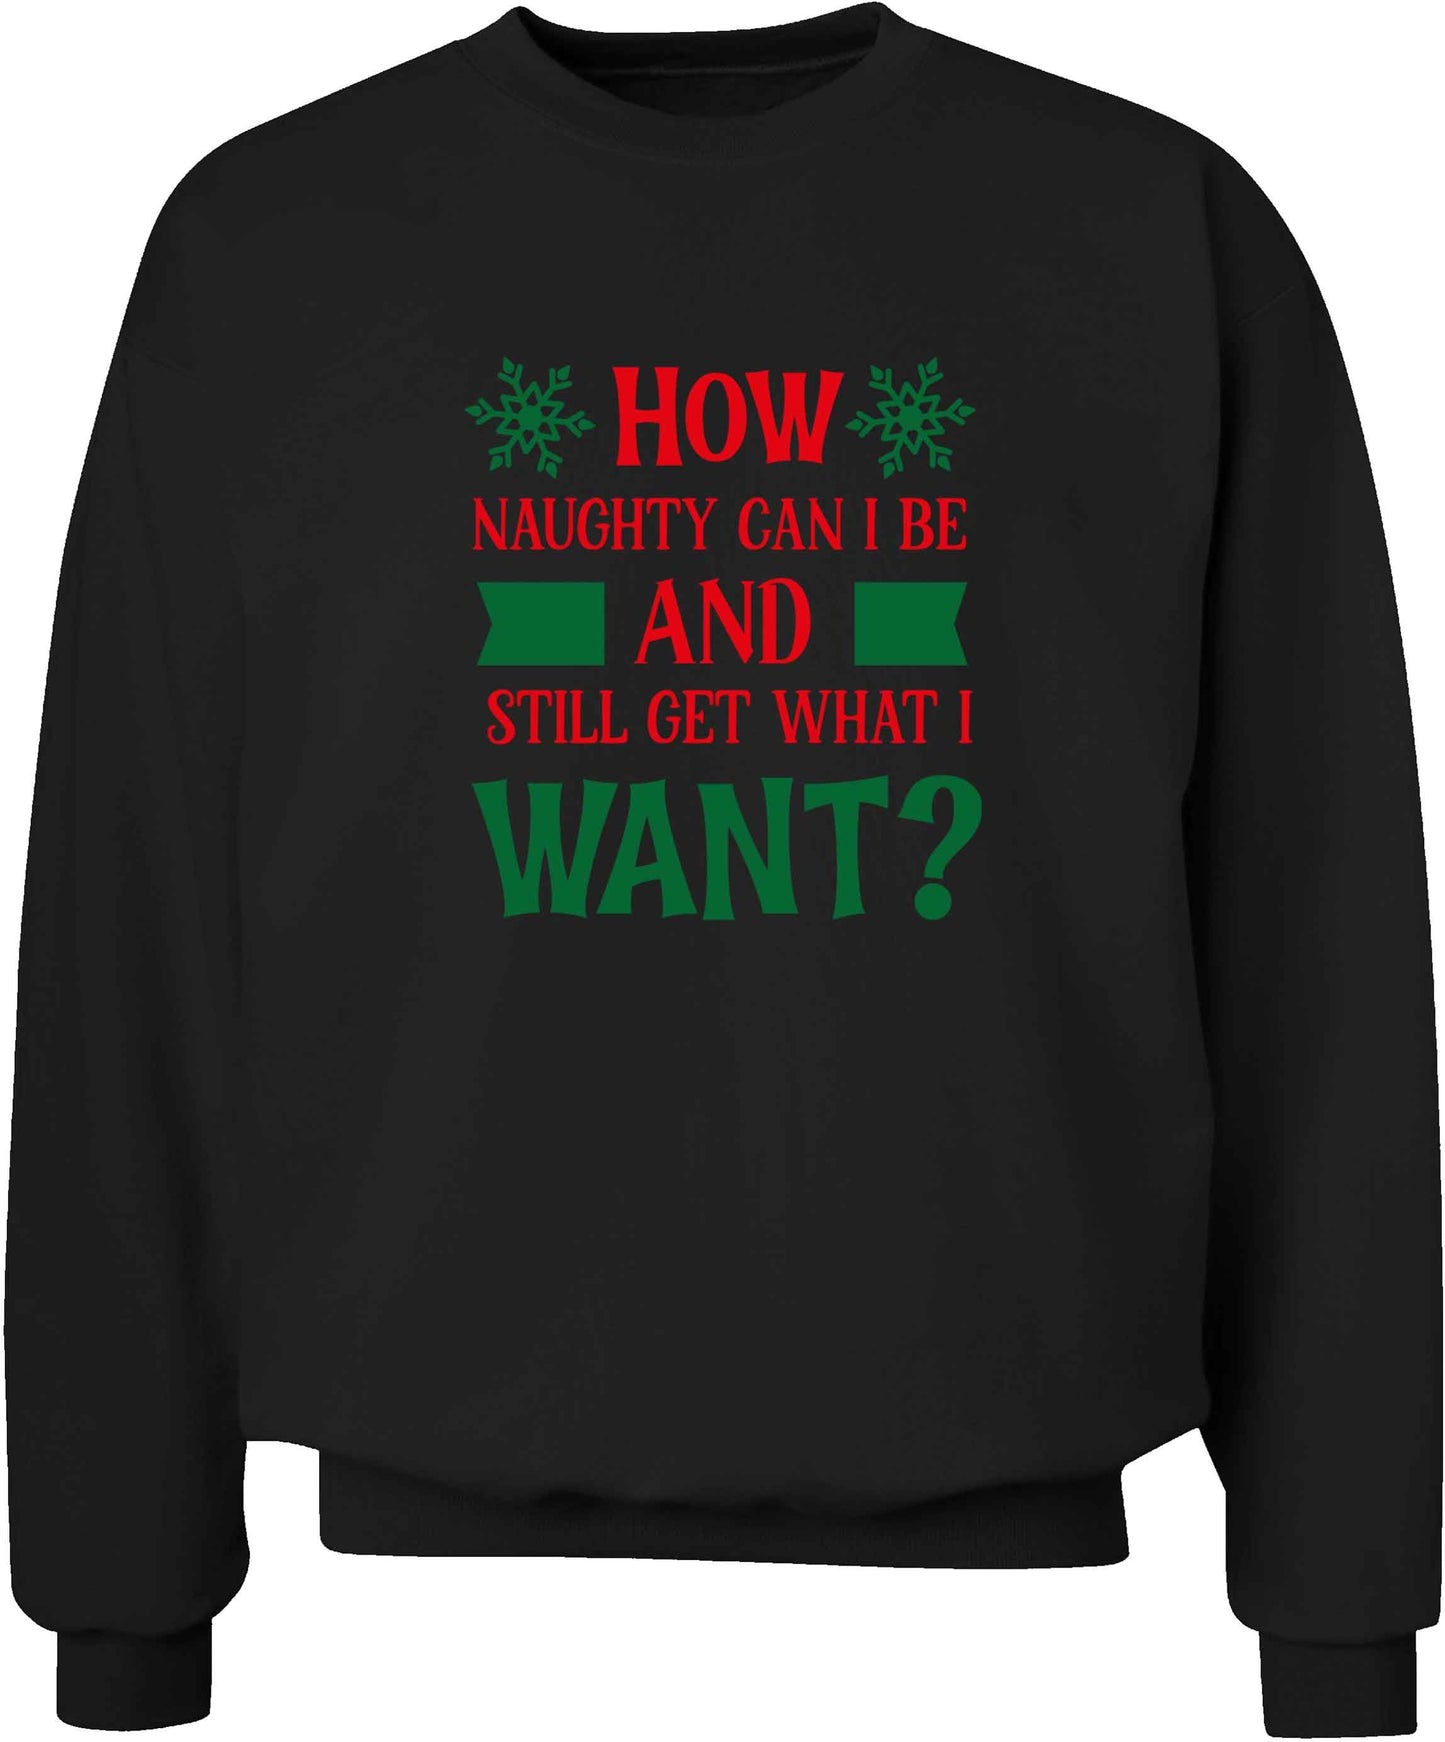 How naughty can I be and still get what I want? adult's unisex black sweater 2XL